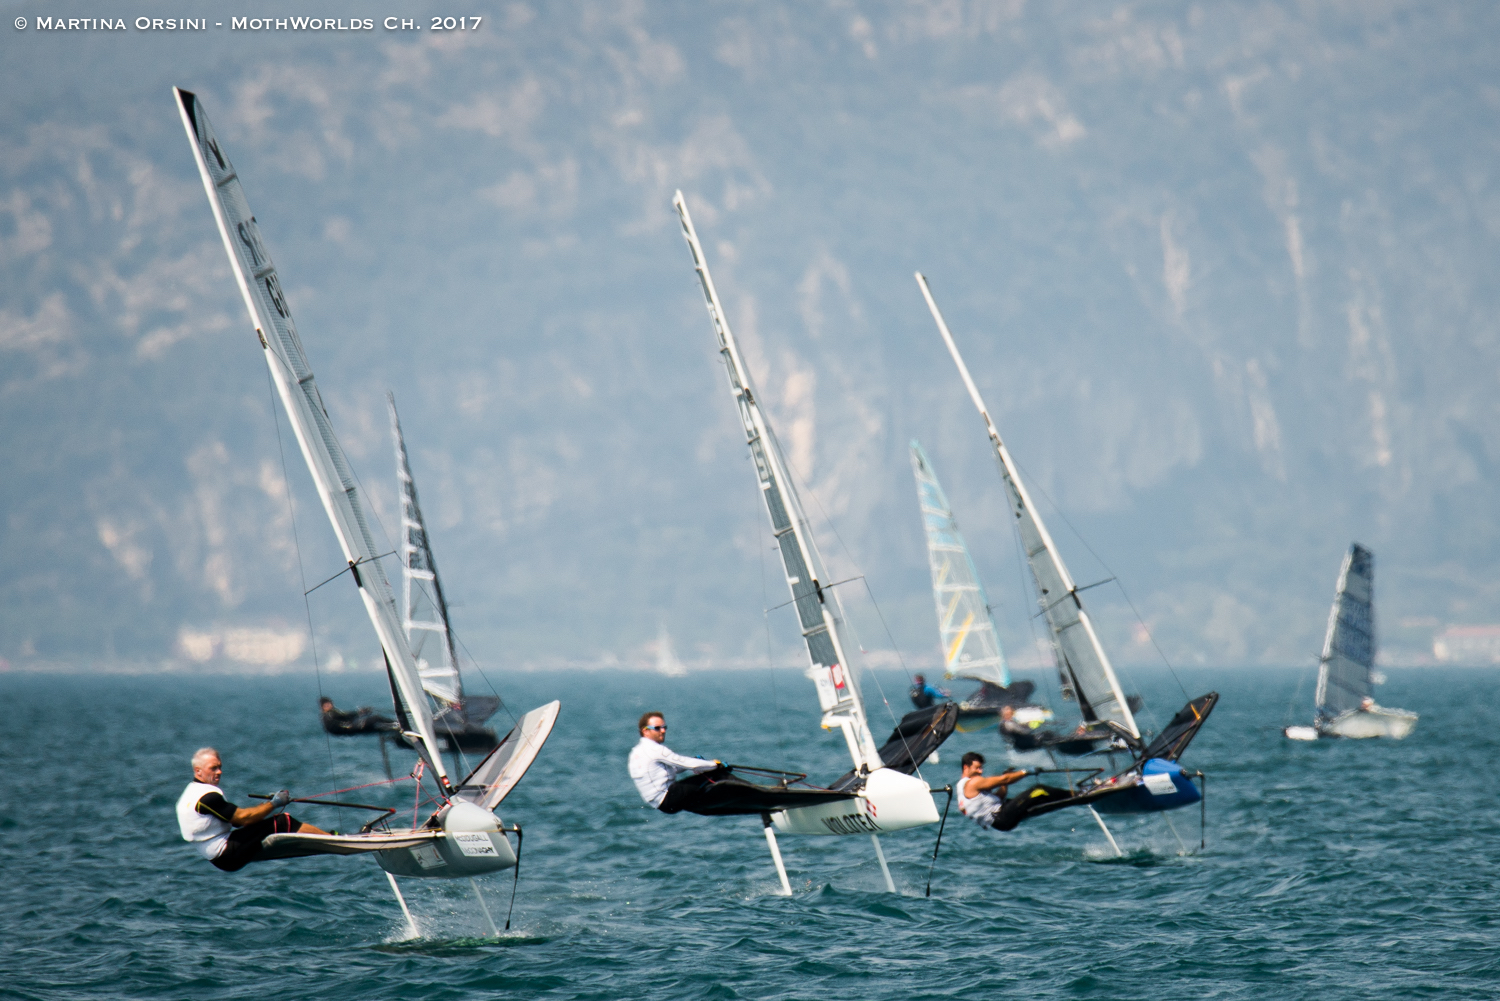 Close racing as they power upwind